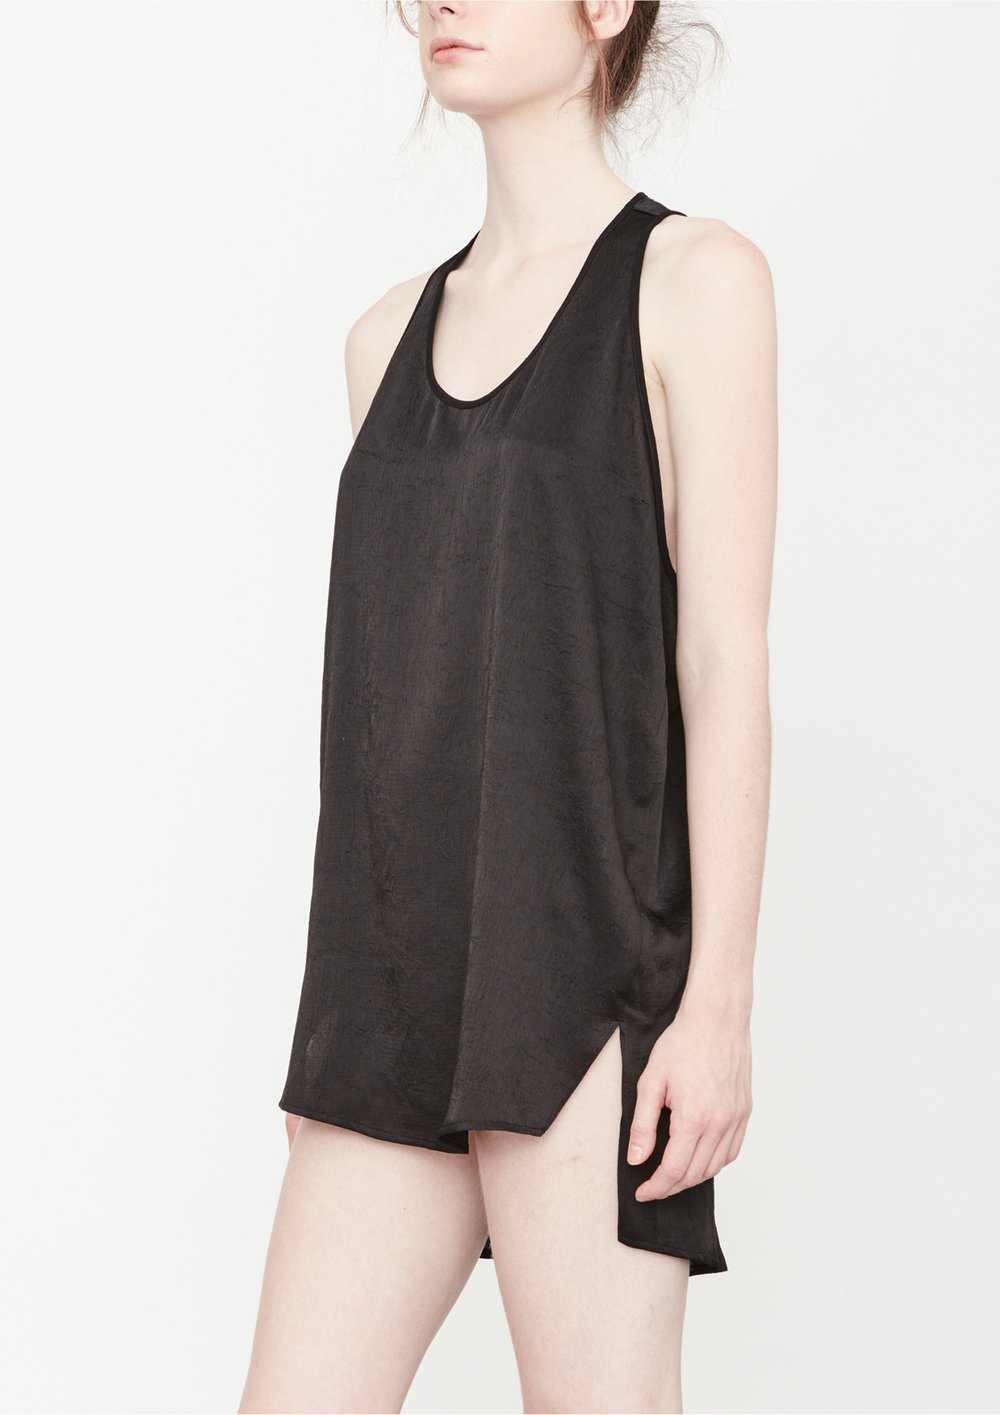 TANK TOP OVERSIZED - black shiny by BERENIK - East Hills Casuals